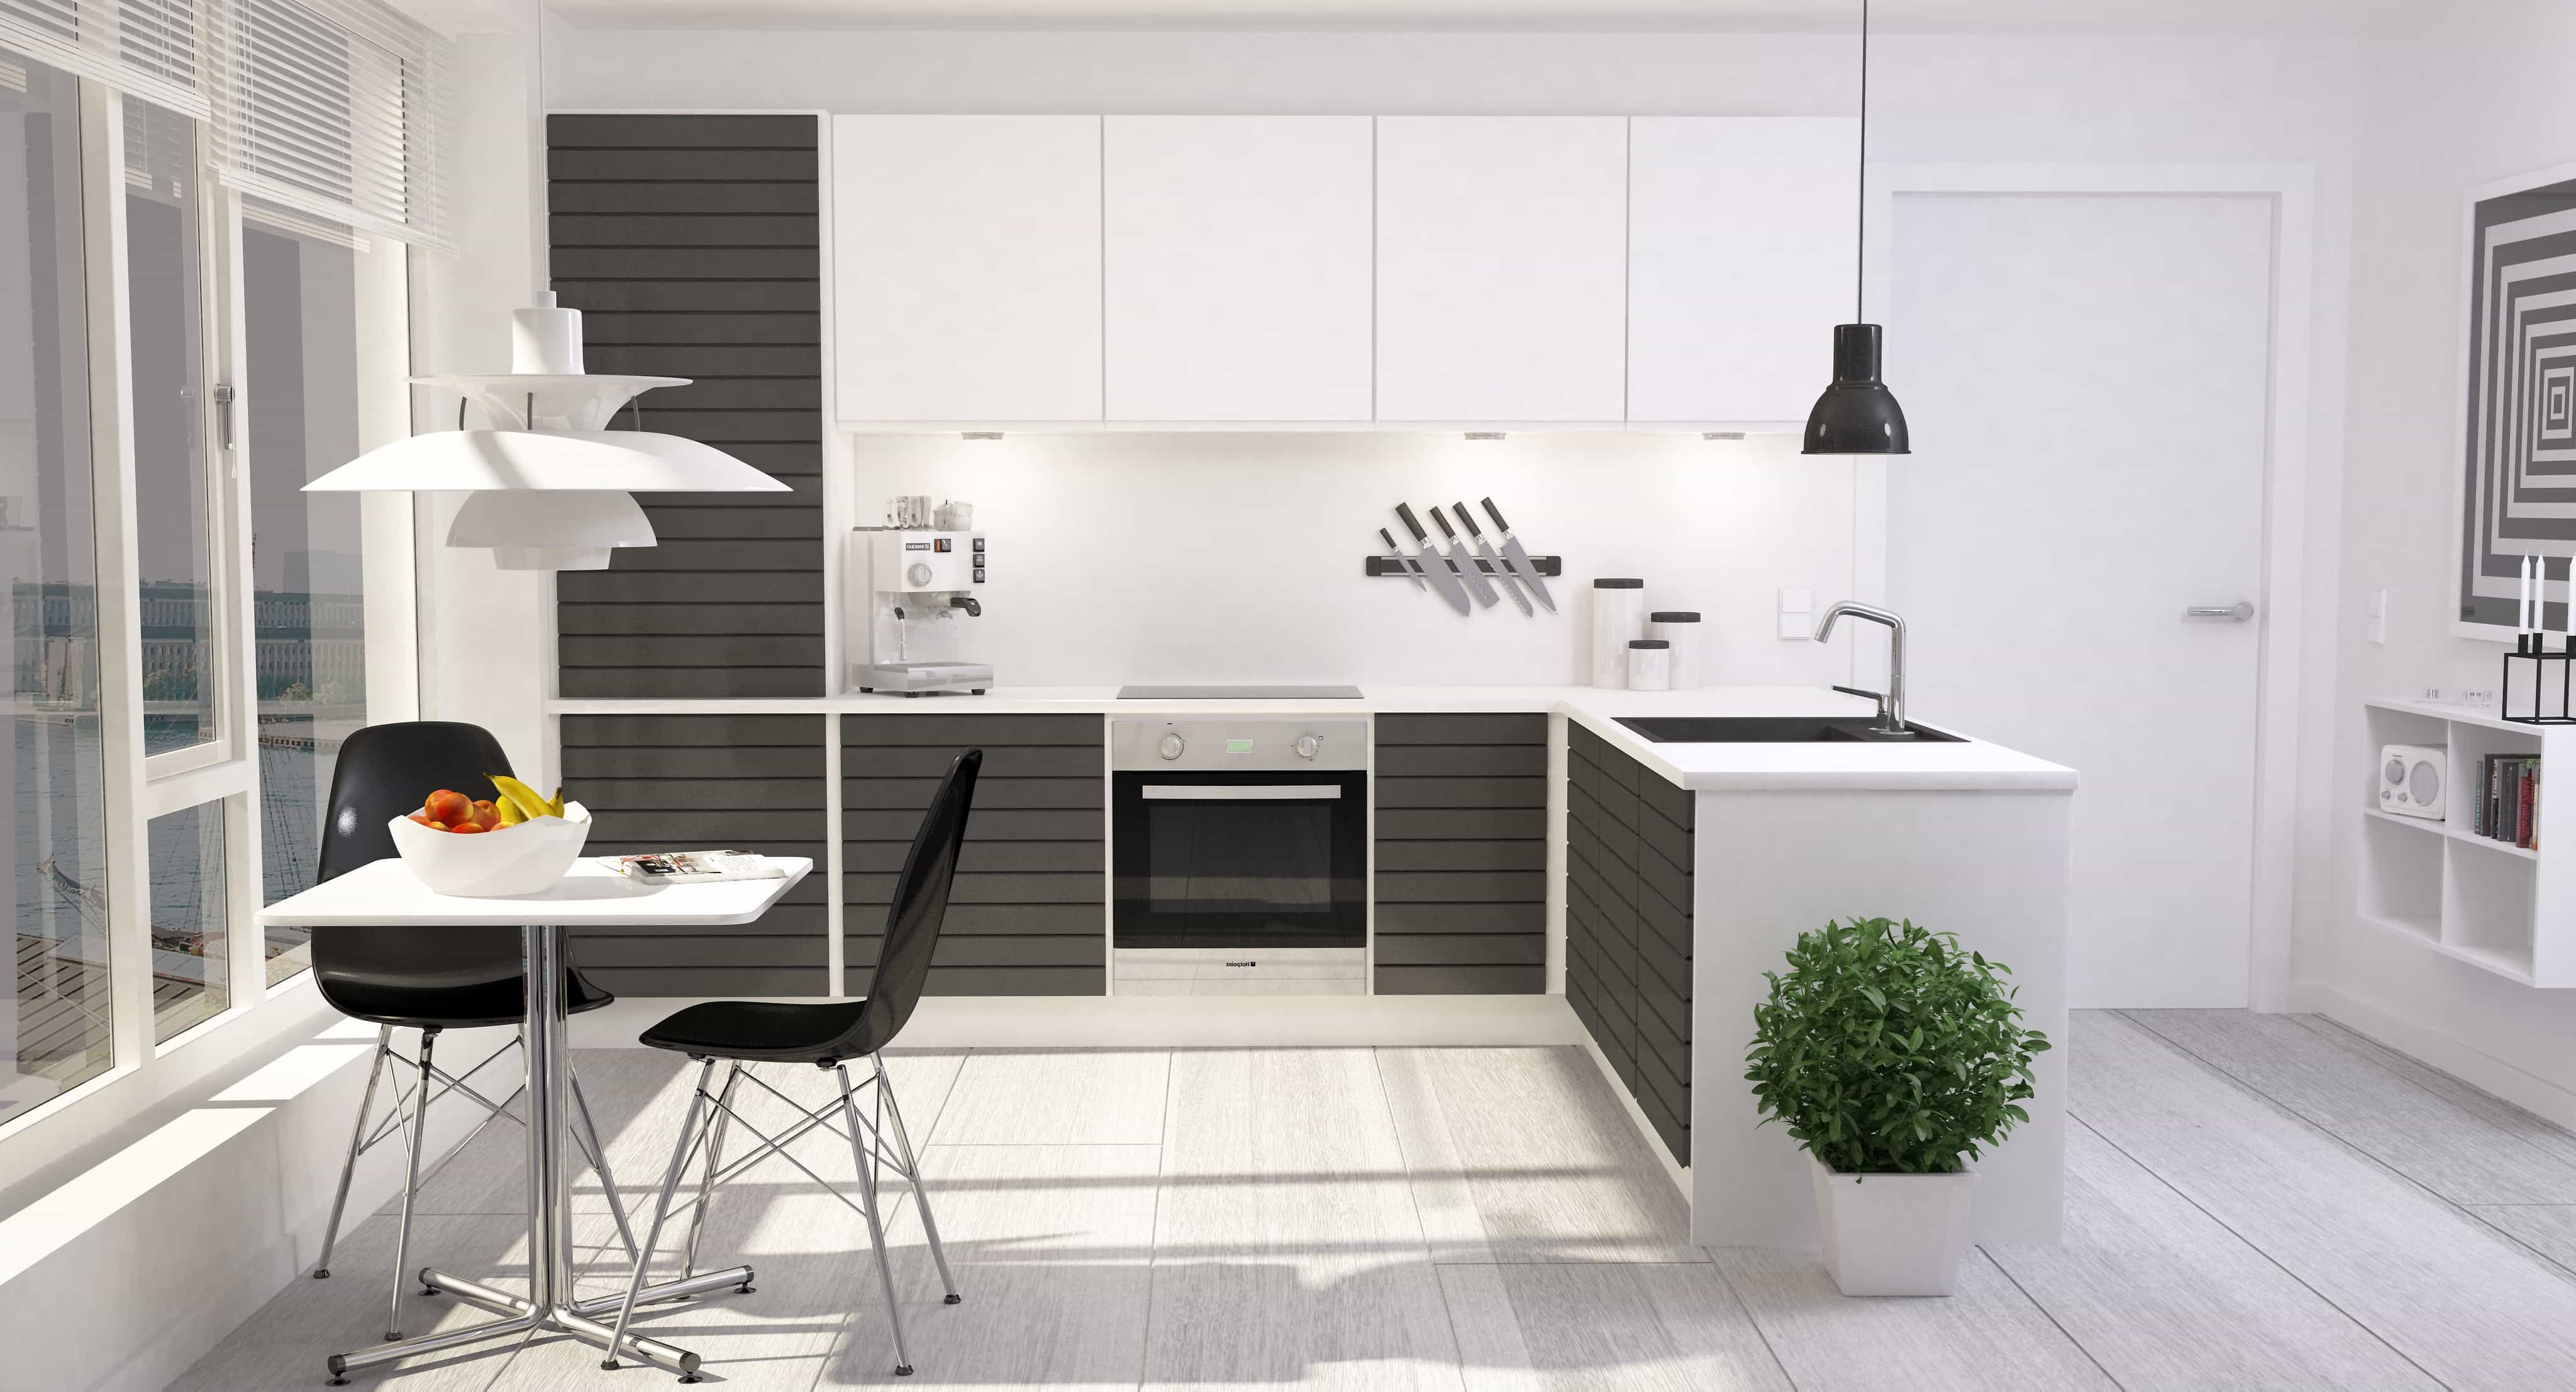 Black And White Contemporary Apartment Kitchen Interior With Flat Panel Cabinets And Small Dining Table And Chairs (Photo 1 of 15)